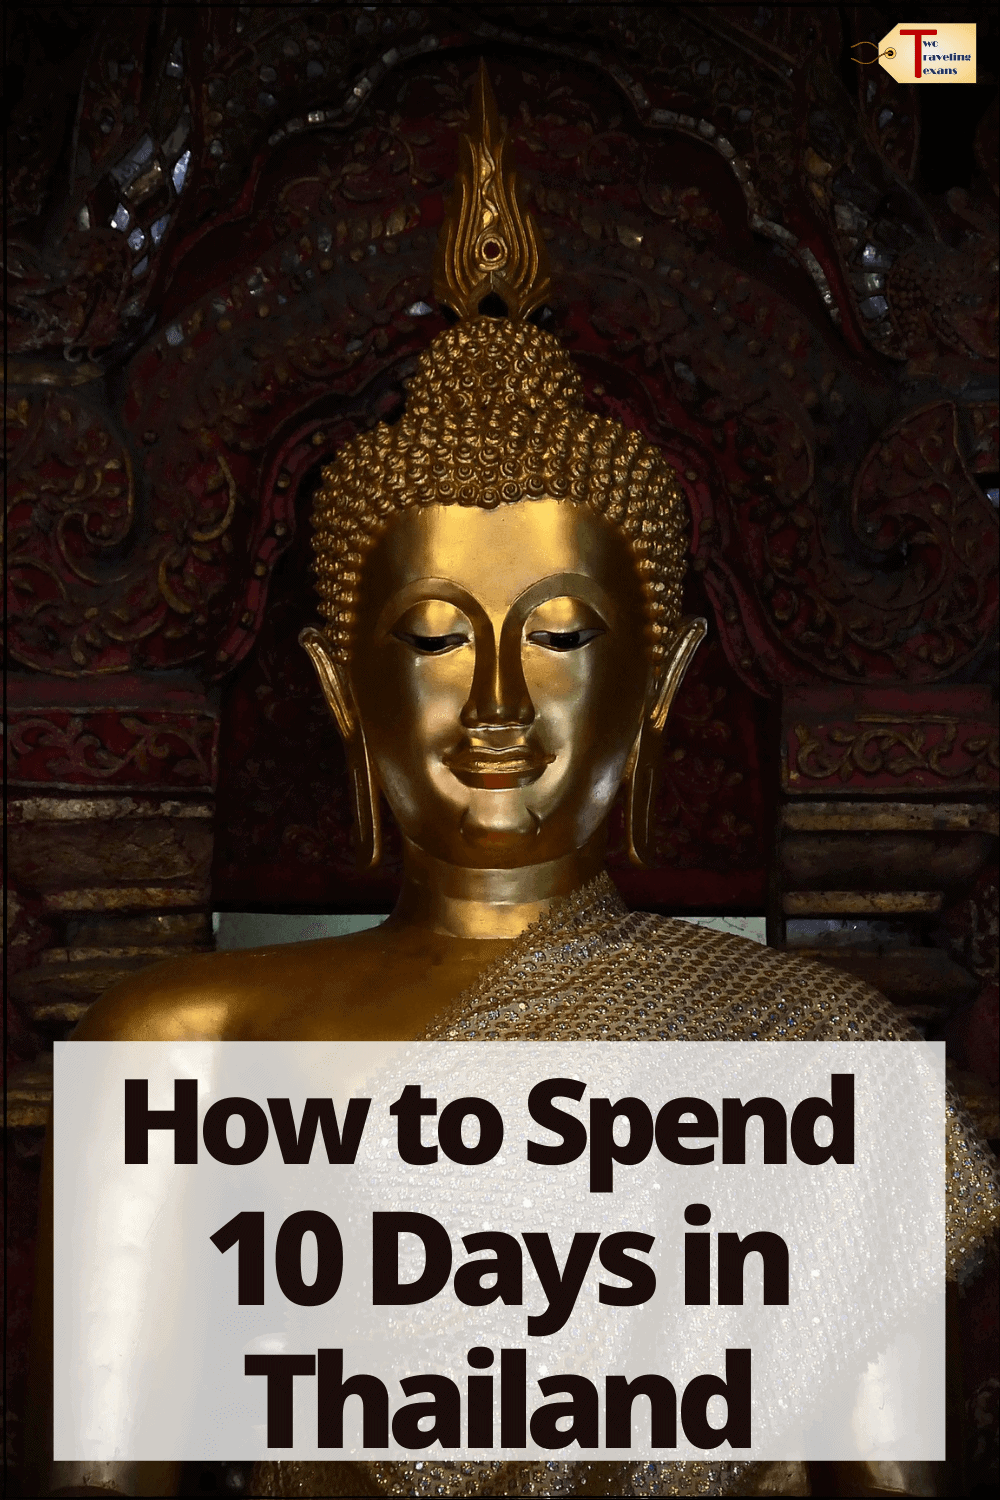 buddha with text overlay "how to spend 10 days in Thailand"